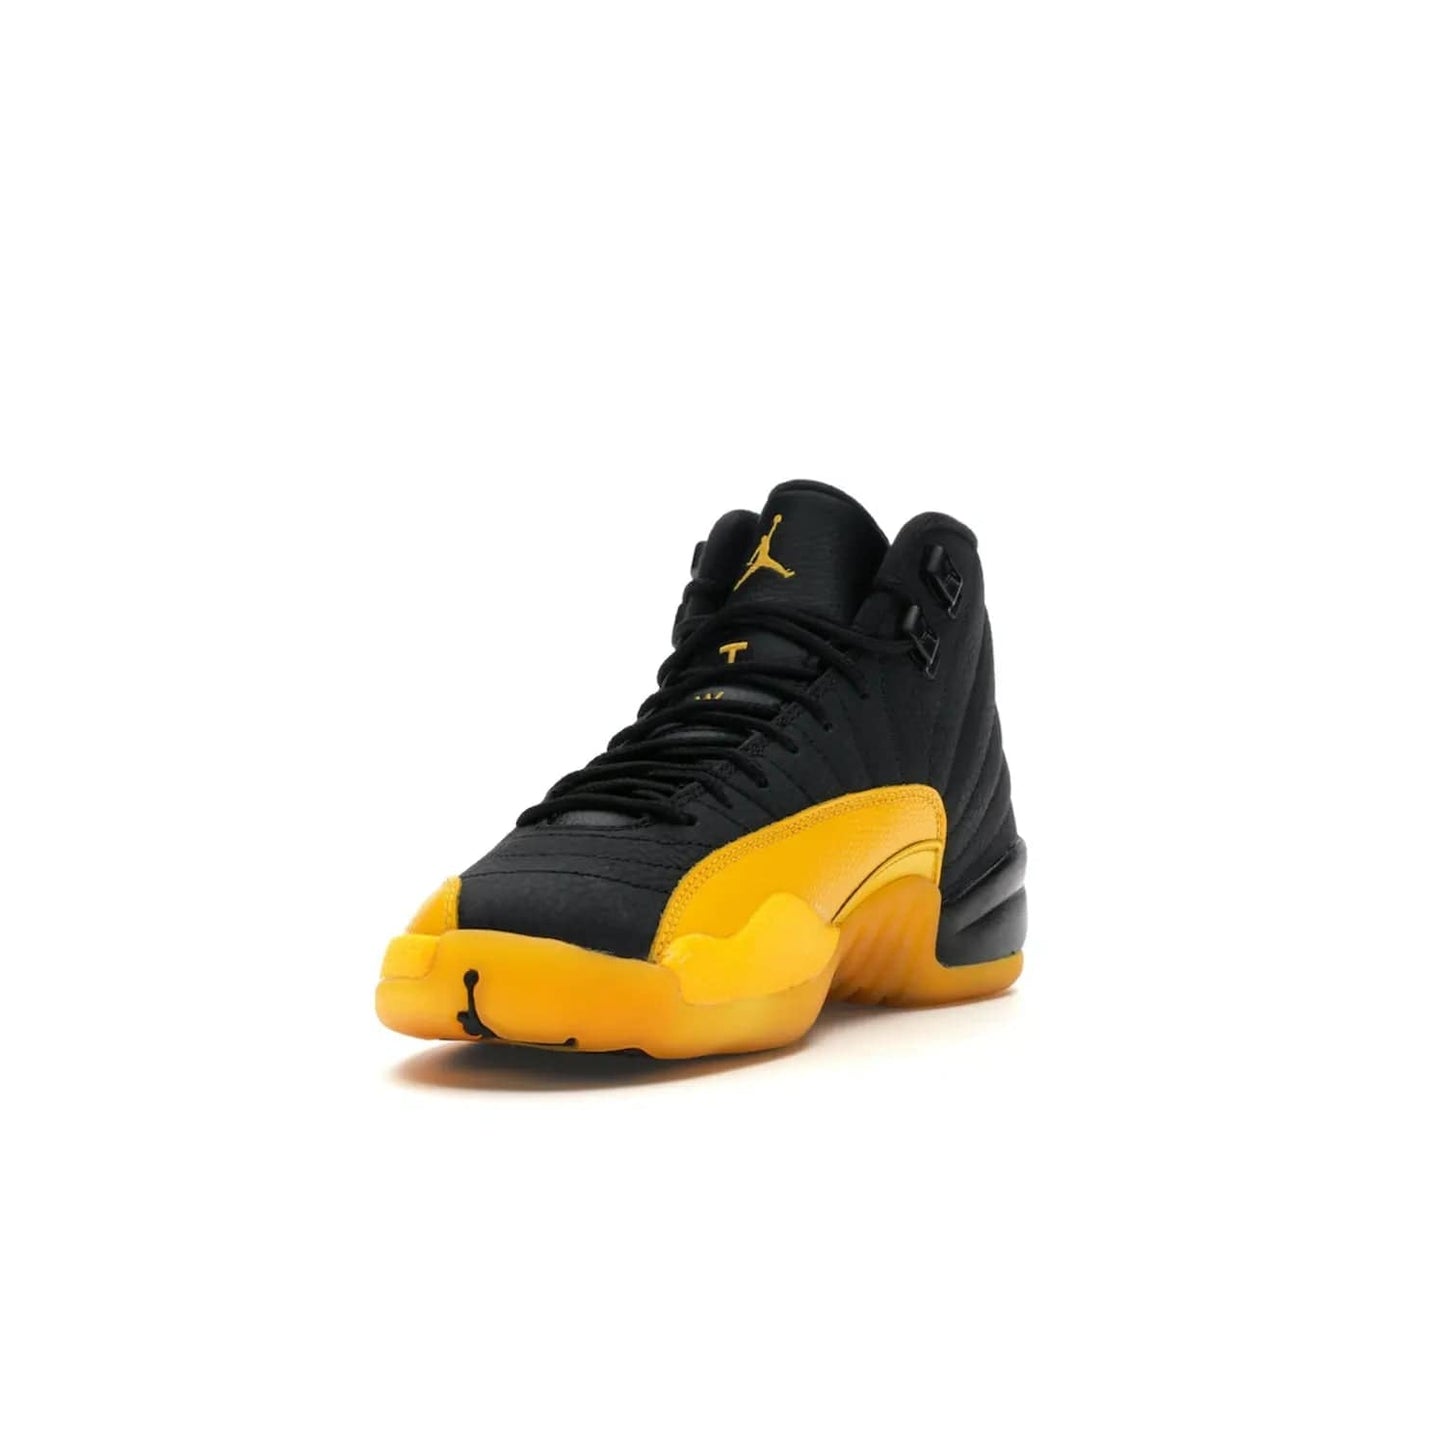 Jordan 12 Retro Black University Gold (GS) - Image 13 - Only at www.BallersClubKickz.com - Upgrade your kid's shoe collection with the Jordan 12 Retro Black University Gold. With classic style, black tumbled leather upper, and University Gold accents, it's a great summer look. Out July 2020.